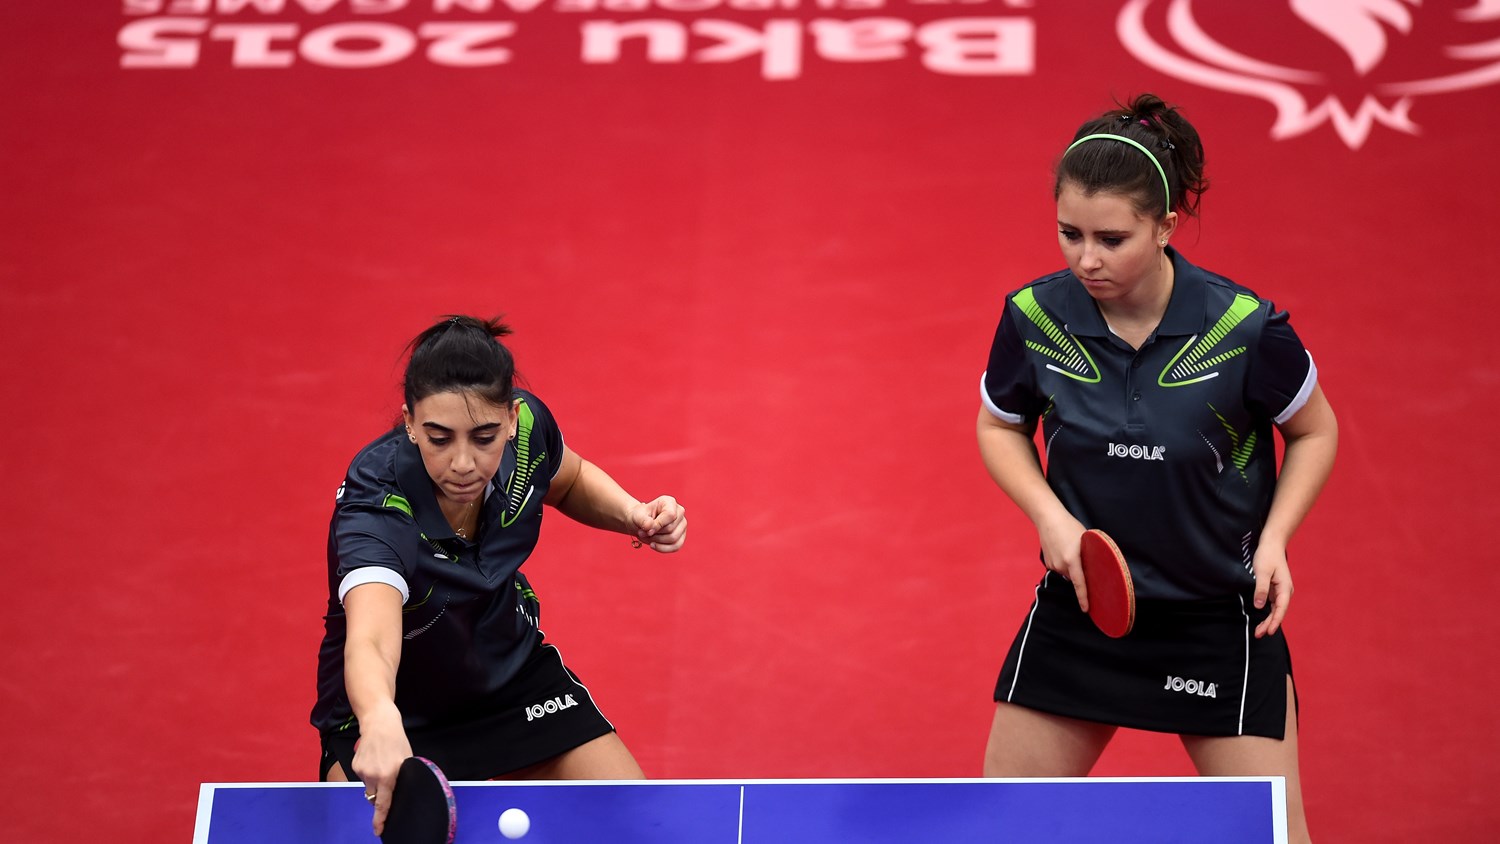 Azerbaijanis feel double edge of support in Table Tennis